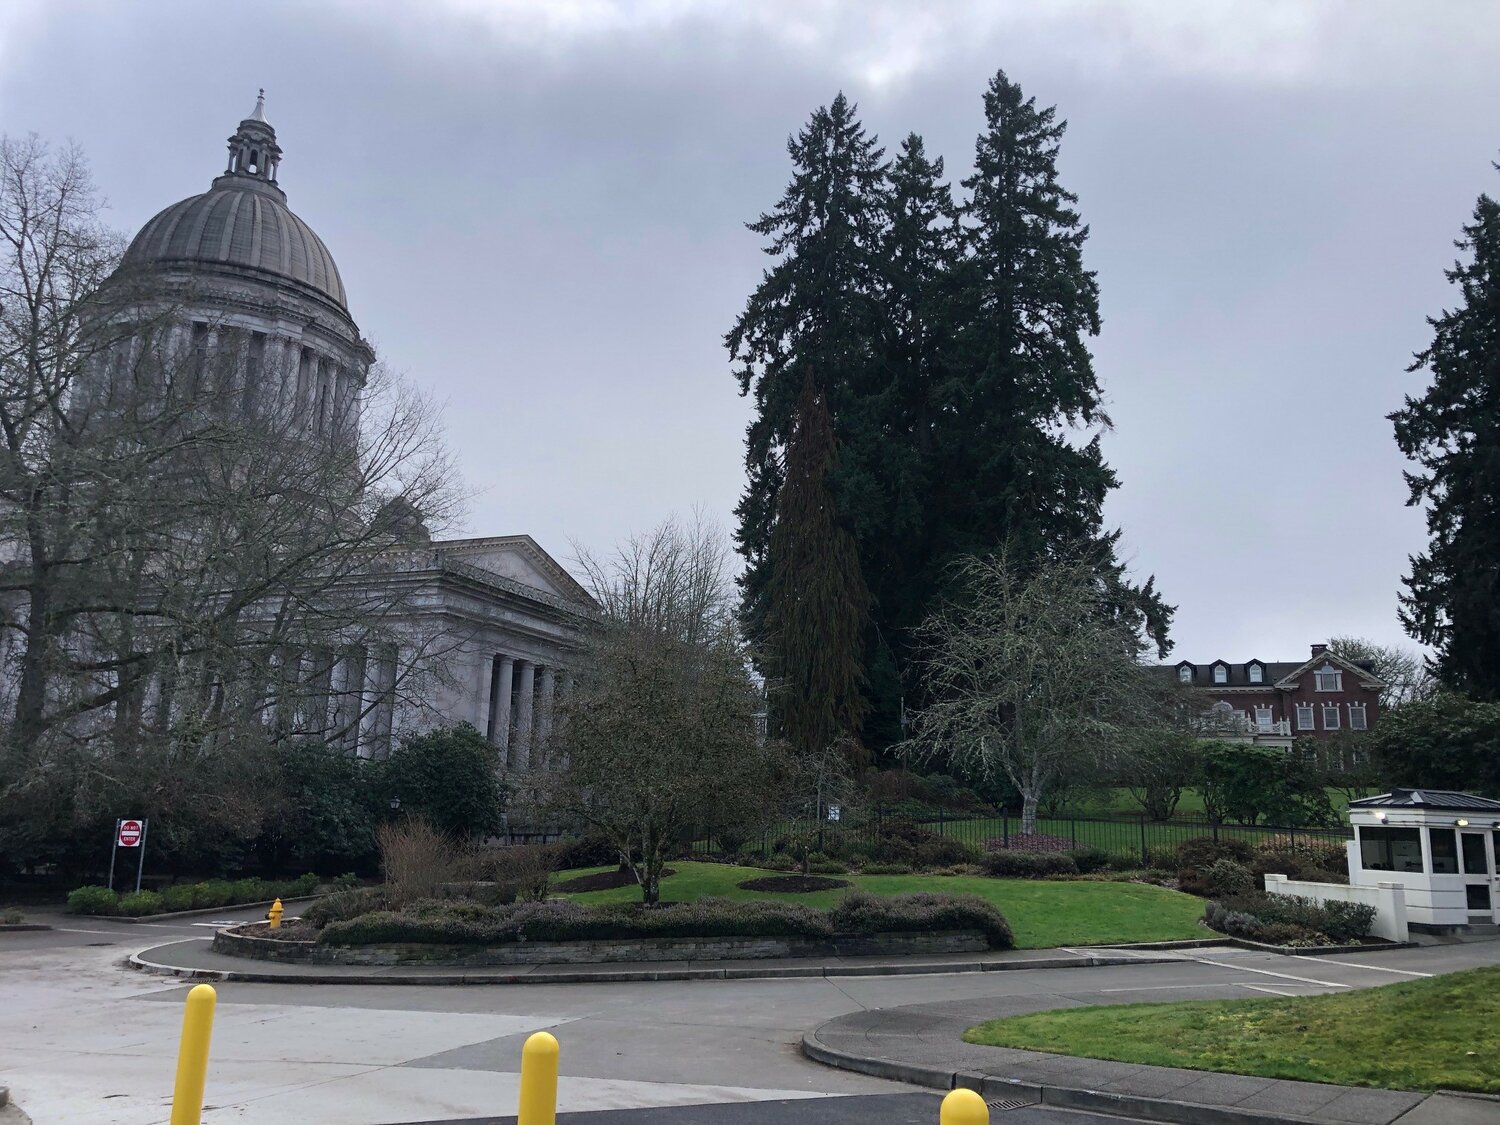 The Washington State Governor's Mansion, shown on the lower right, is located immediately west of the Legislative Building (Capitol).